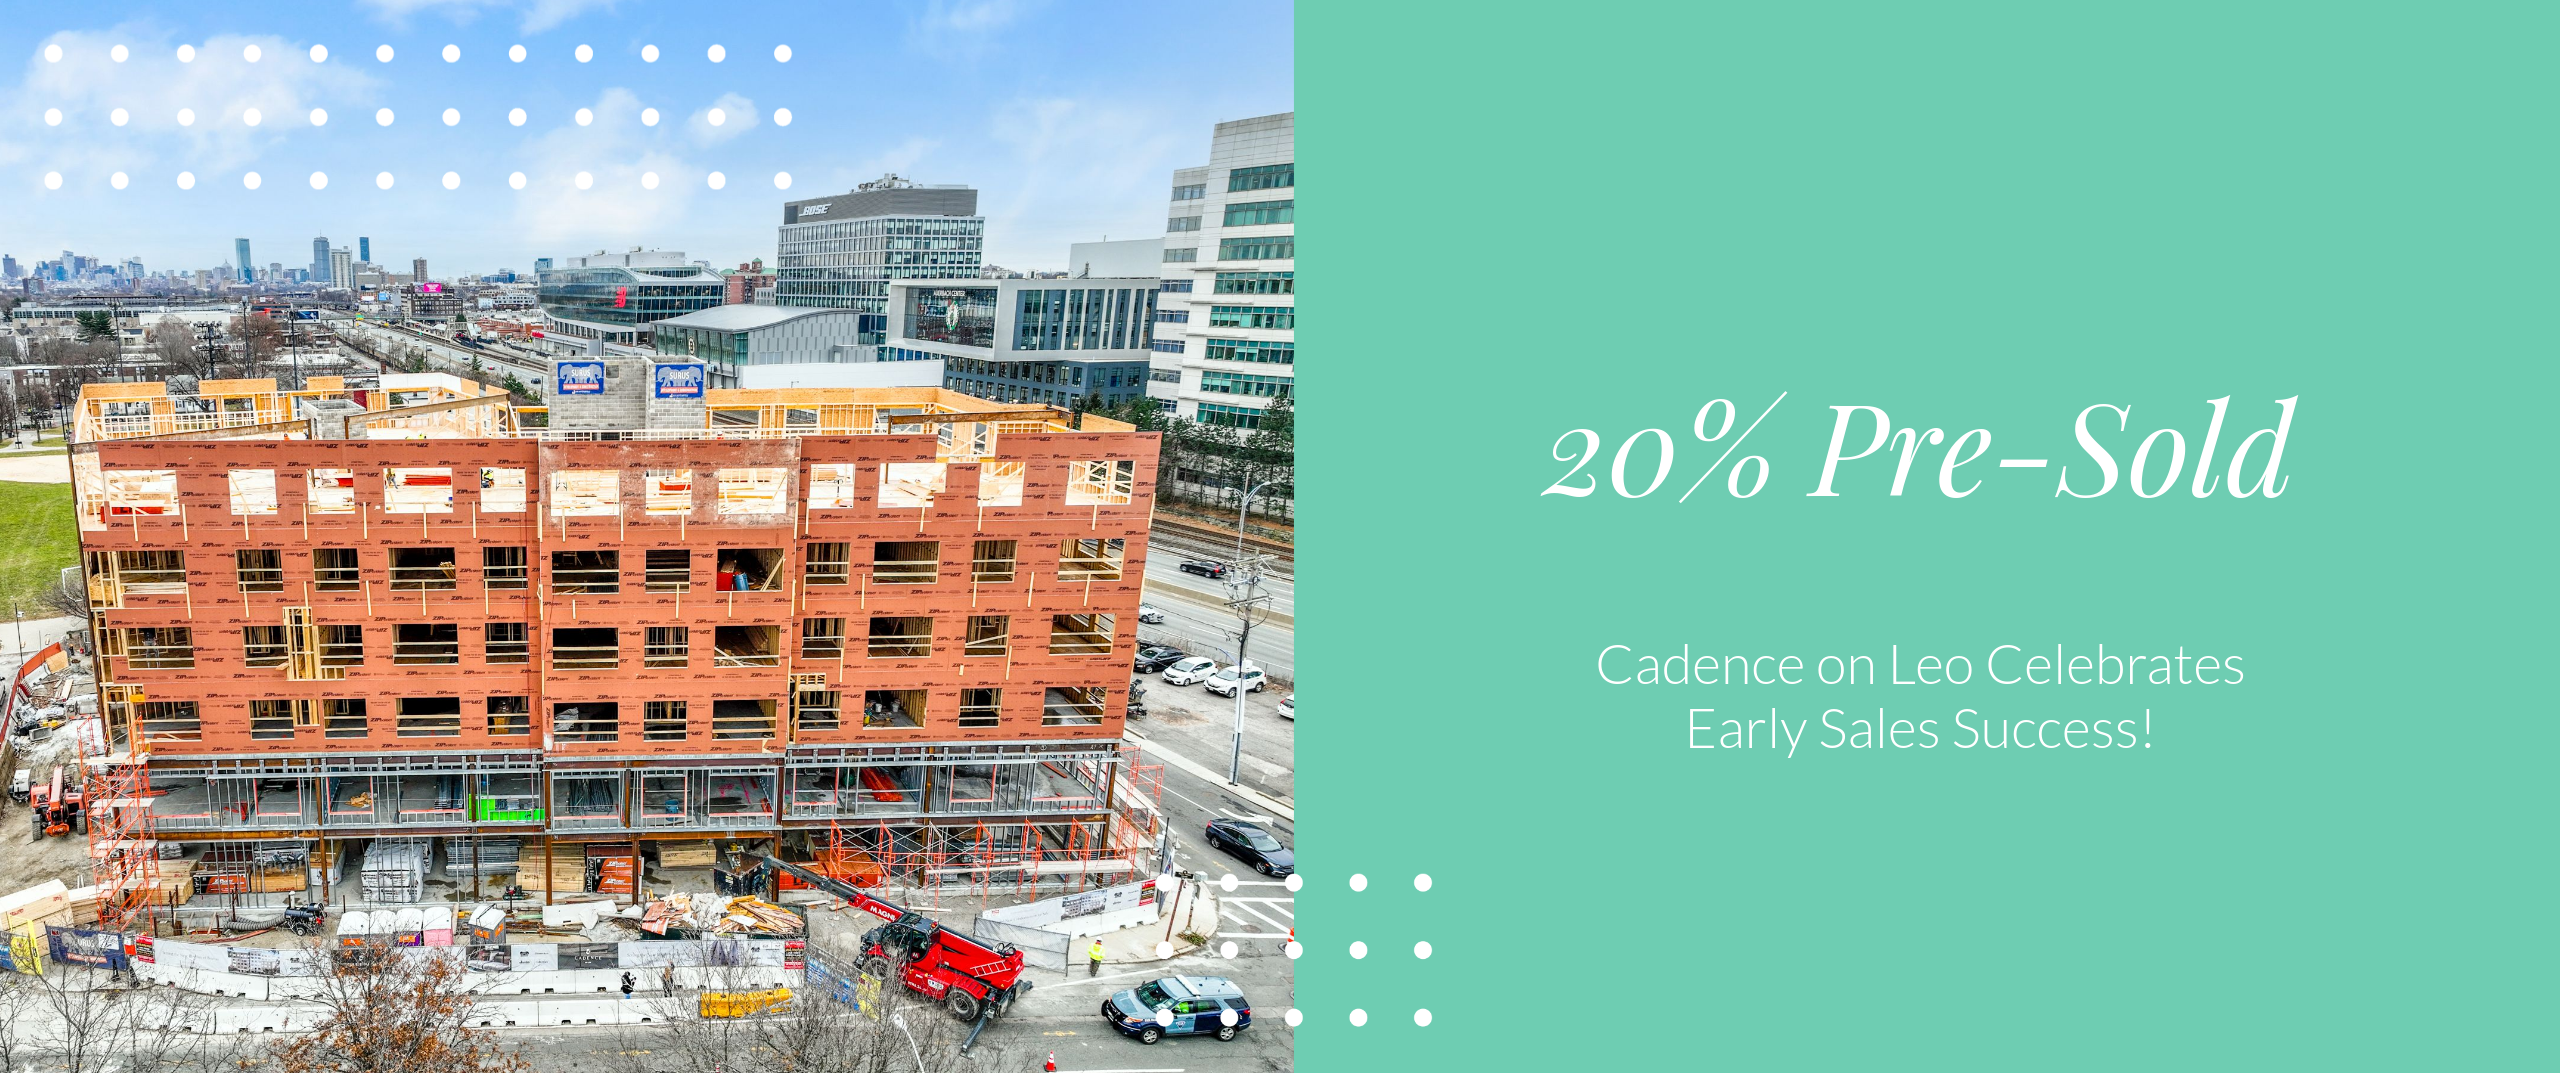 Early Pre-Sales Are Strong At Cadence on Leo